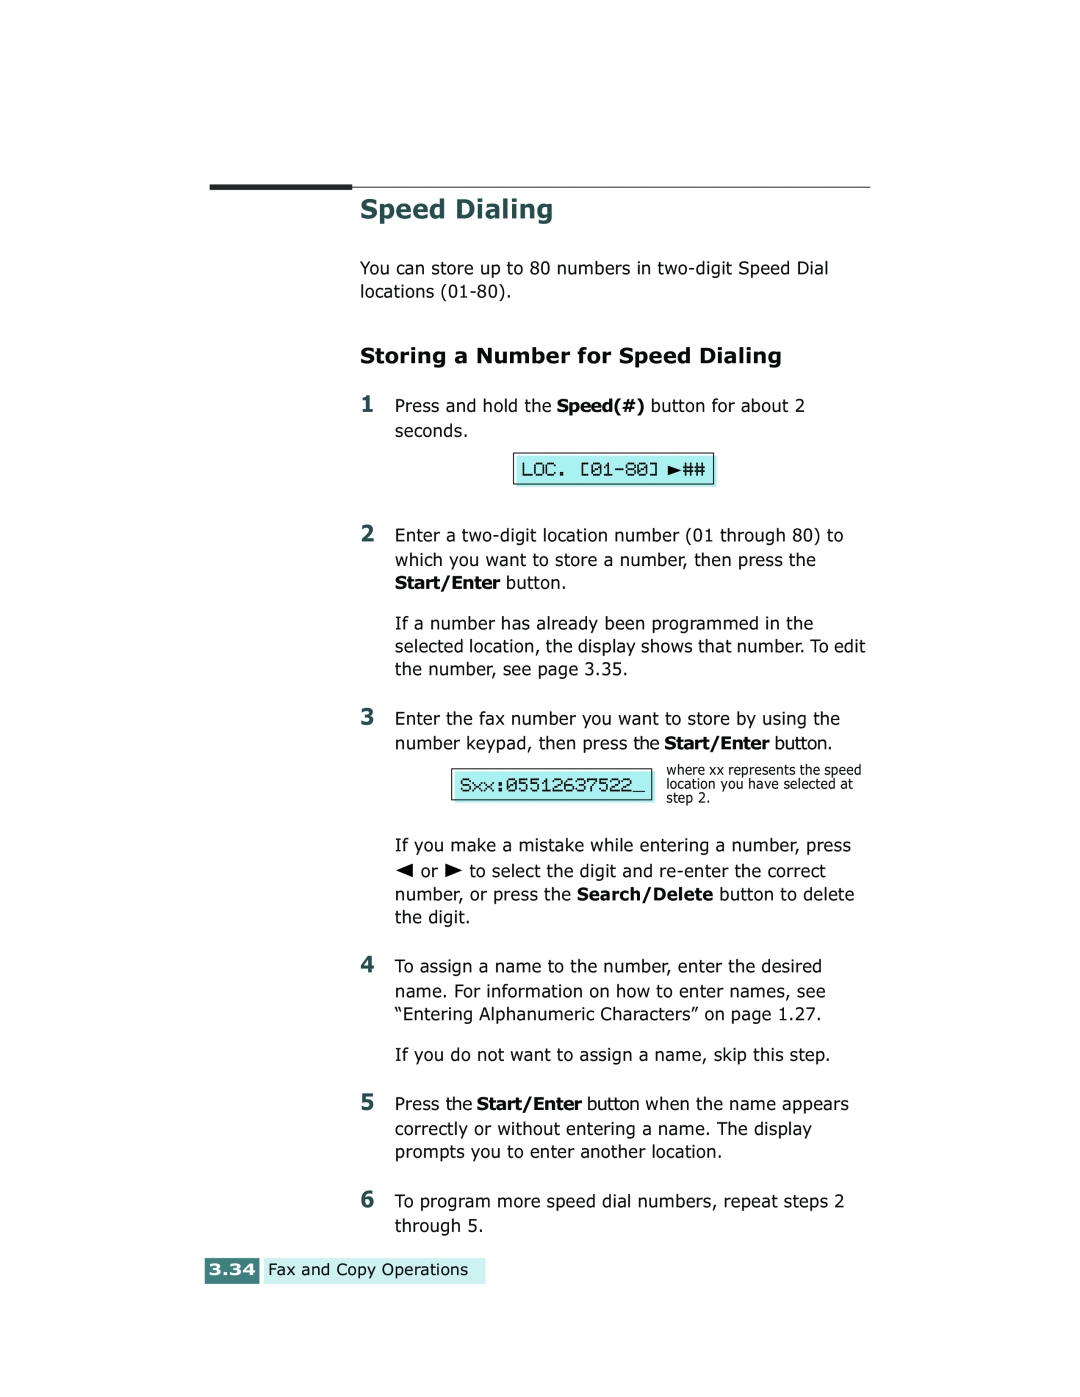 Xerox Pro 580 manual Storing a Number for Speed Dialing 